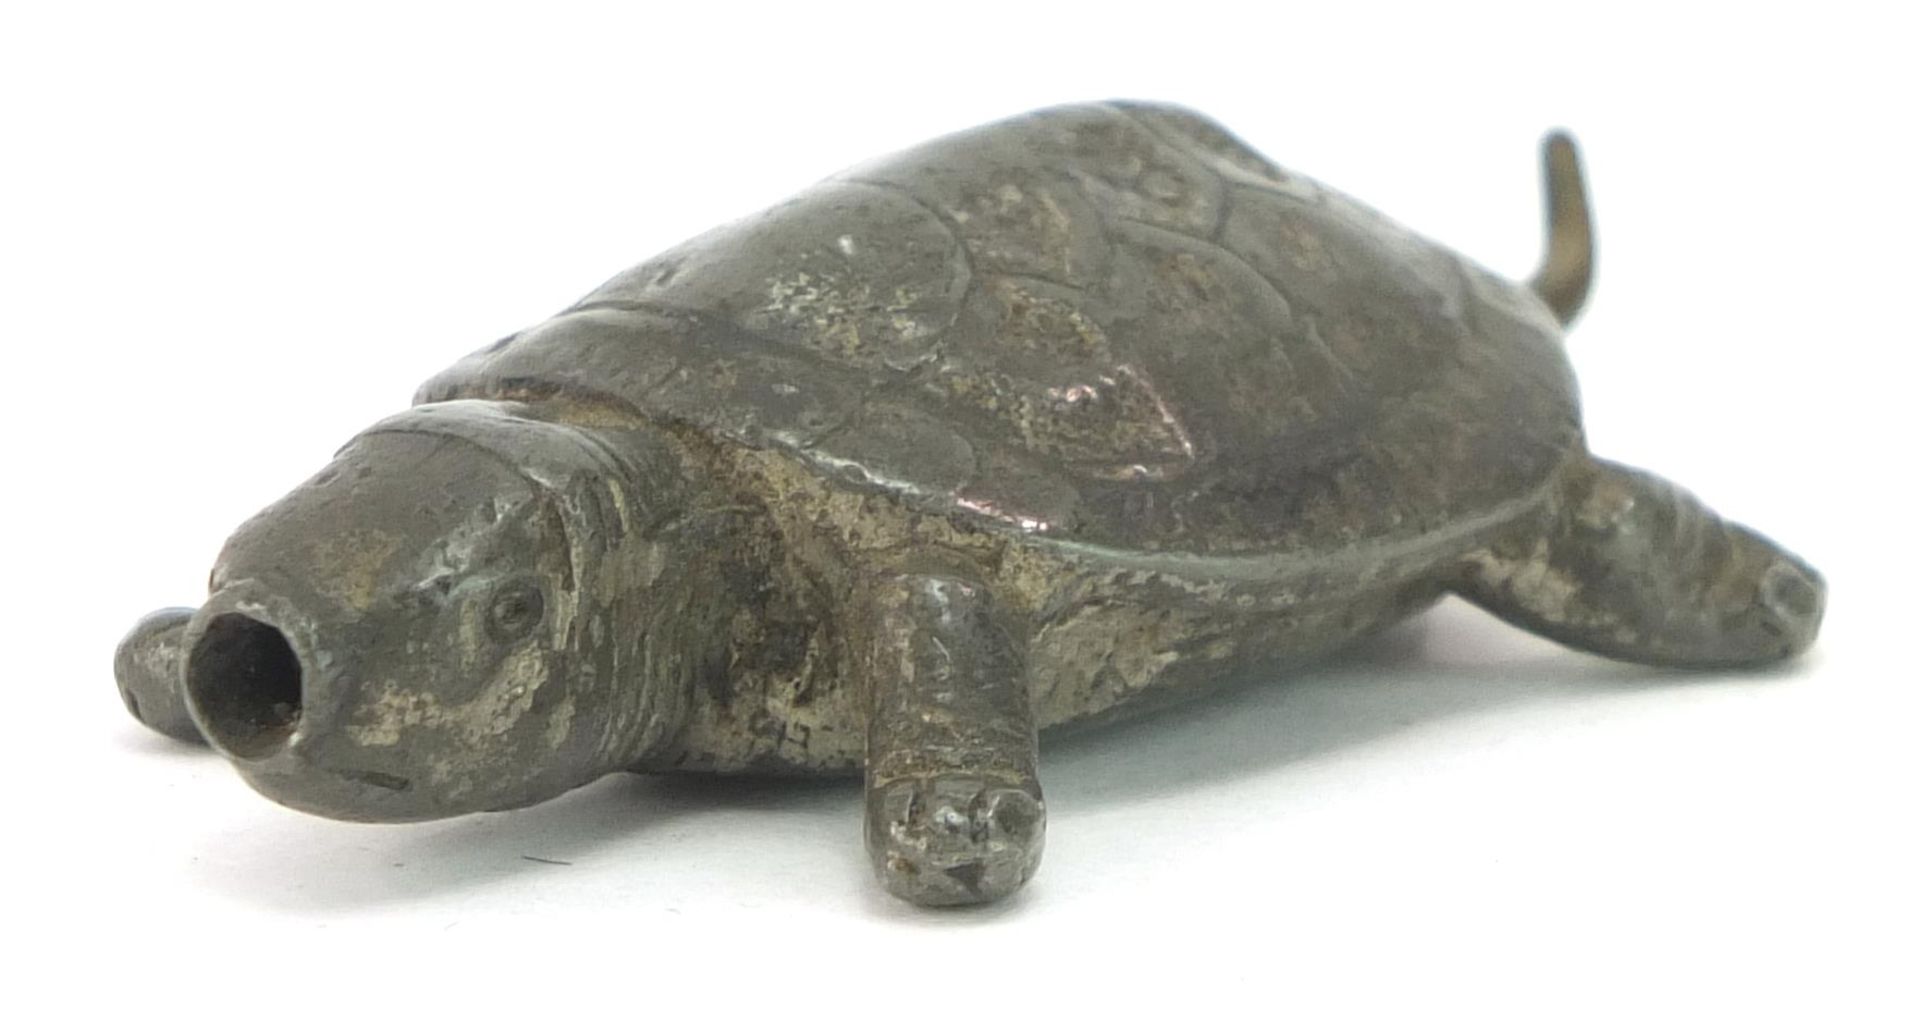 Novelty cast metal propelling pencil in the form of a tortoise, 5.5cm in length